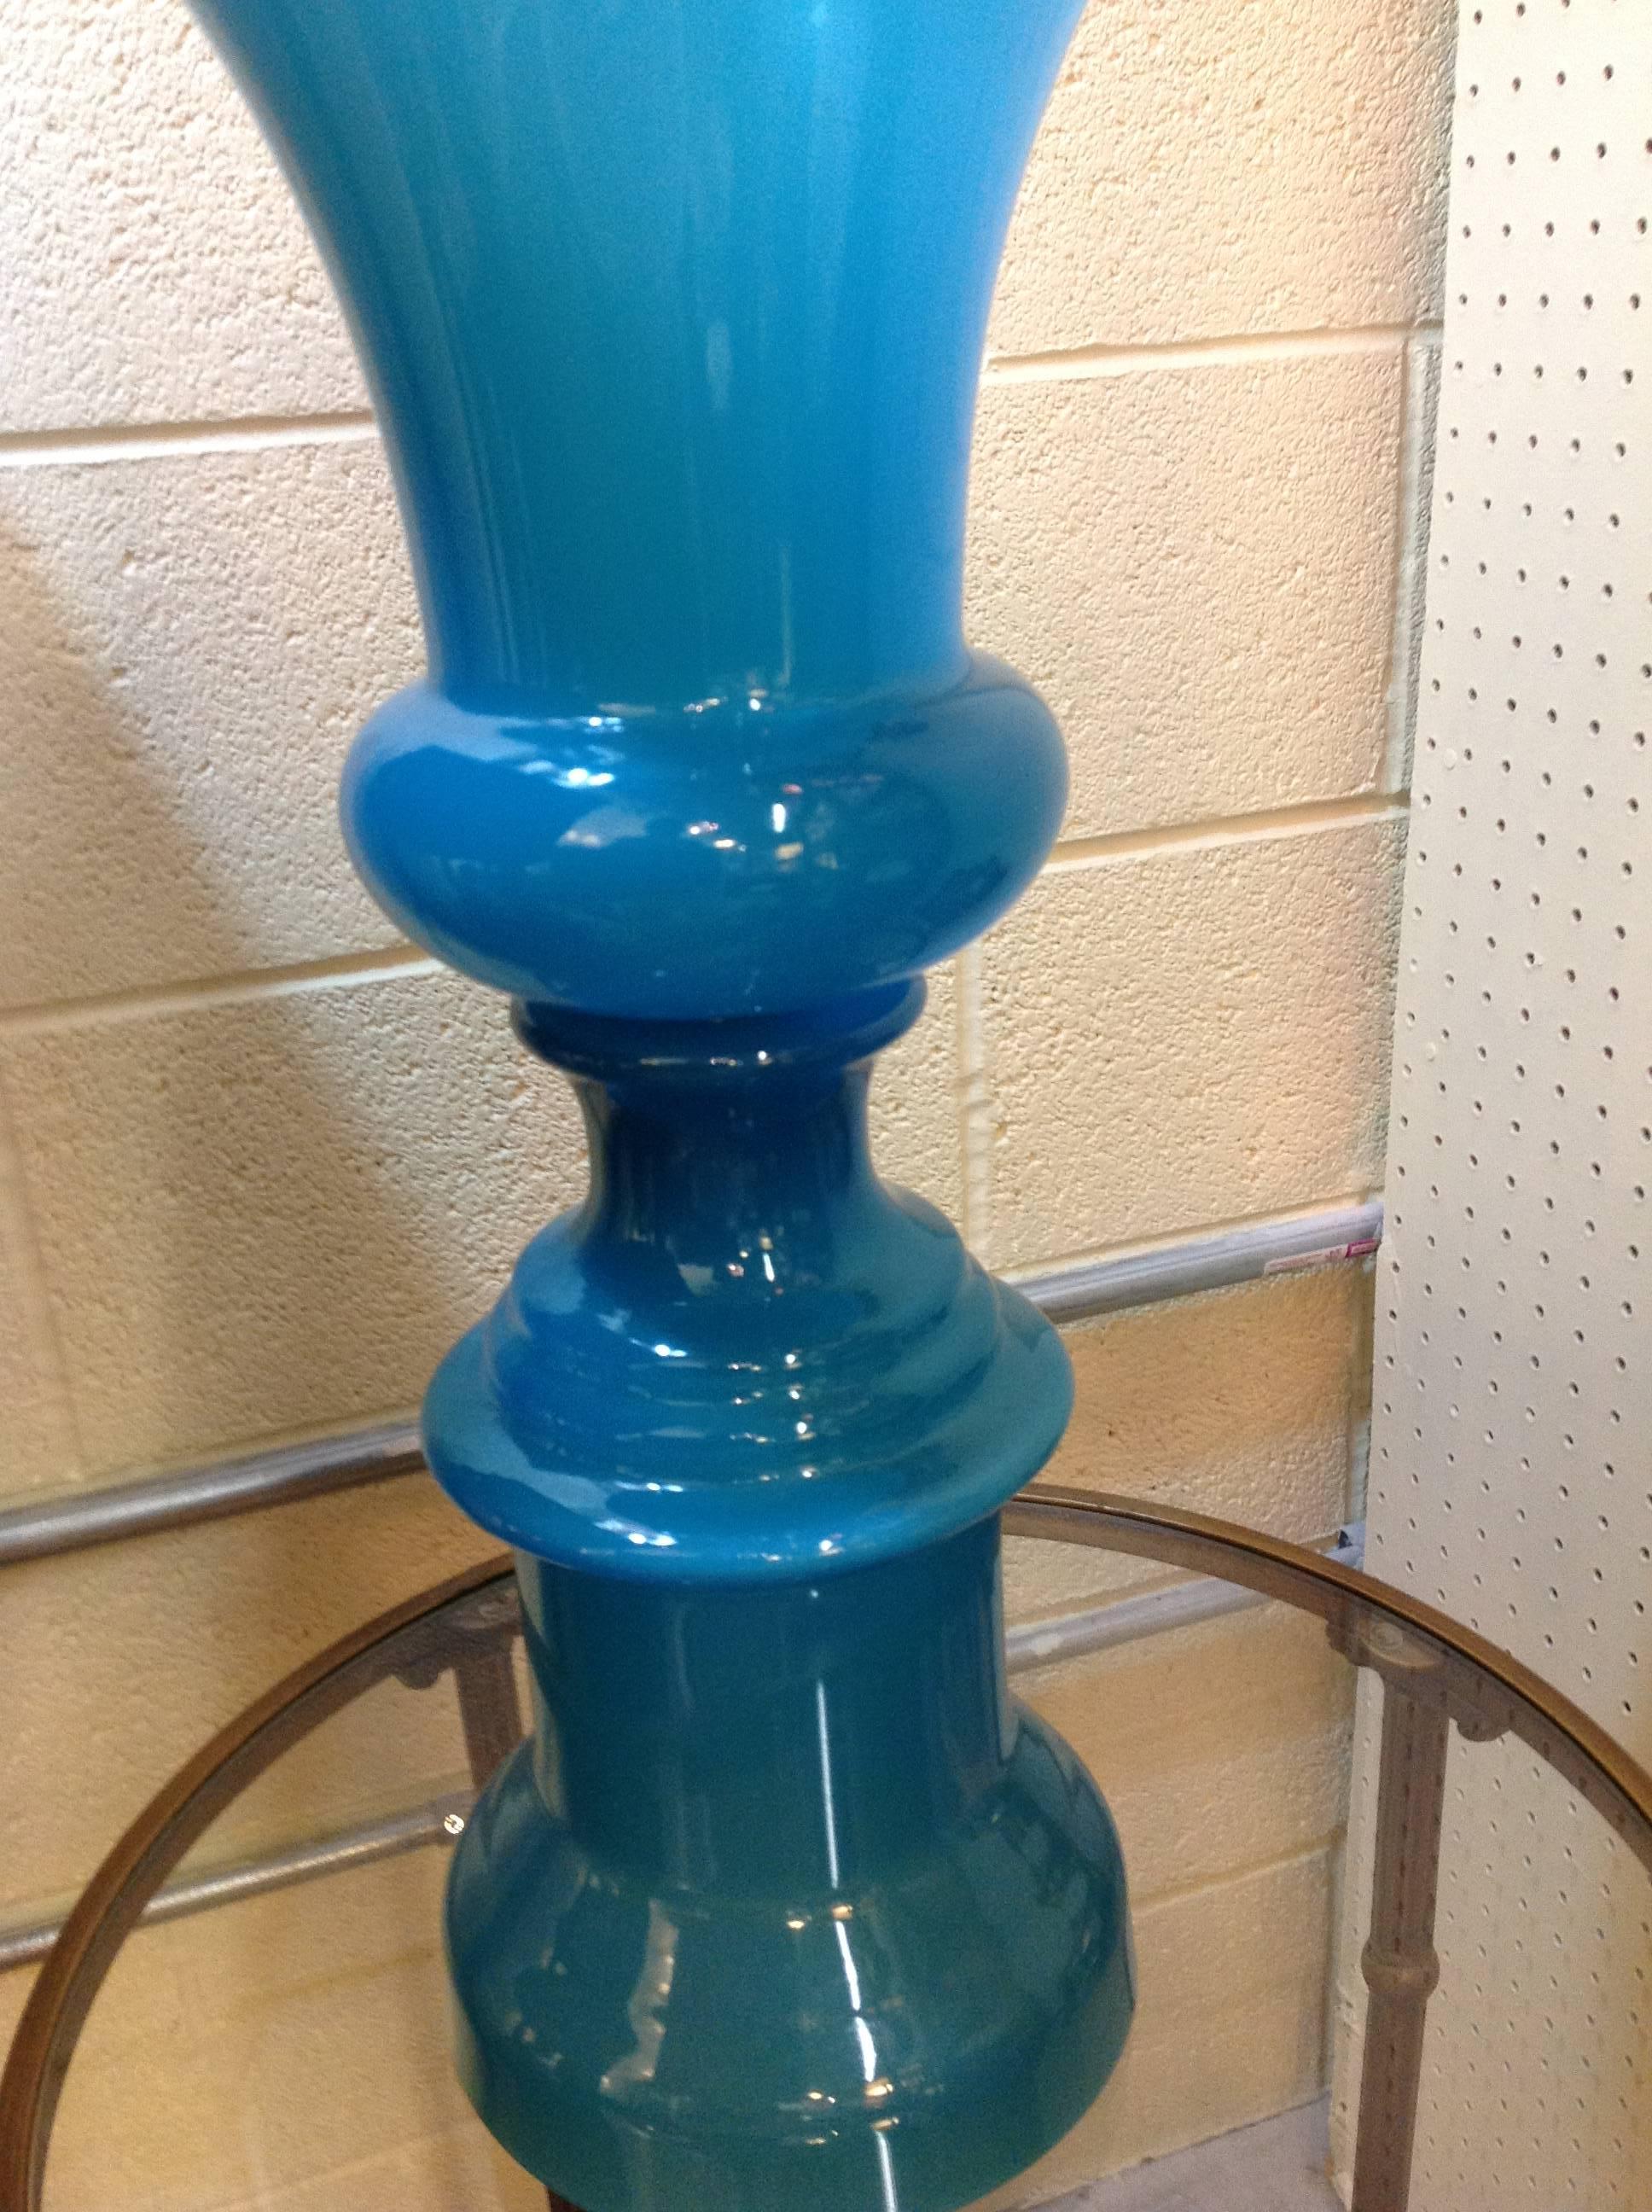 The turquoise color of this two piece vase is beautiful.